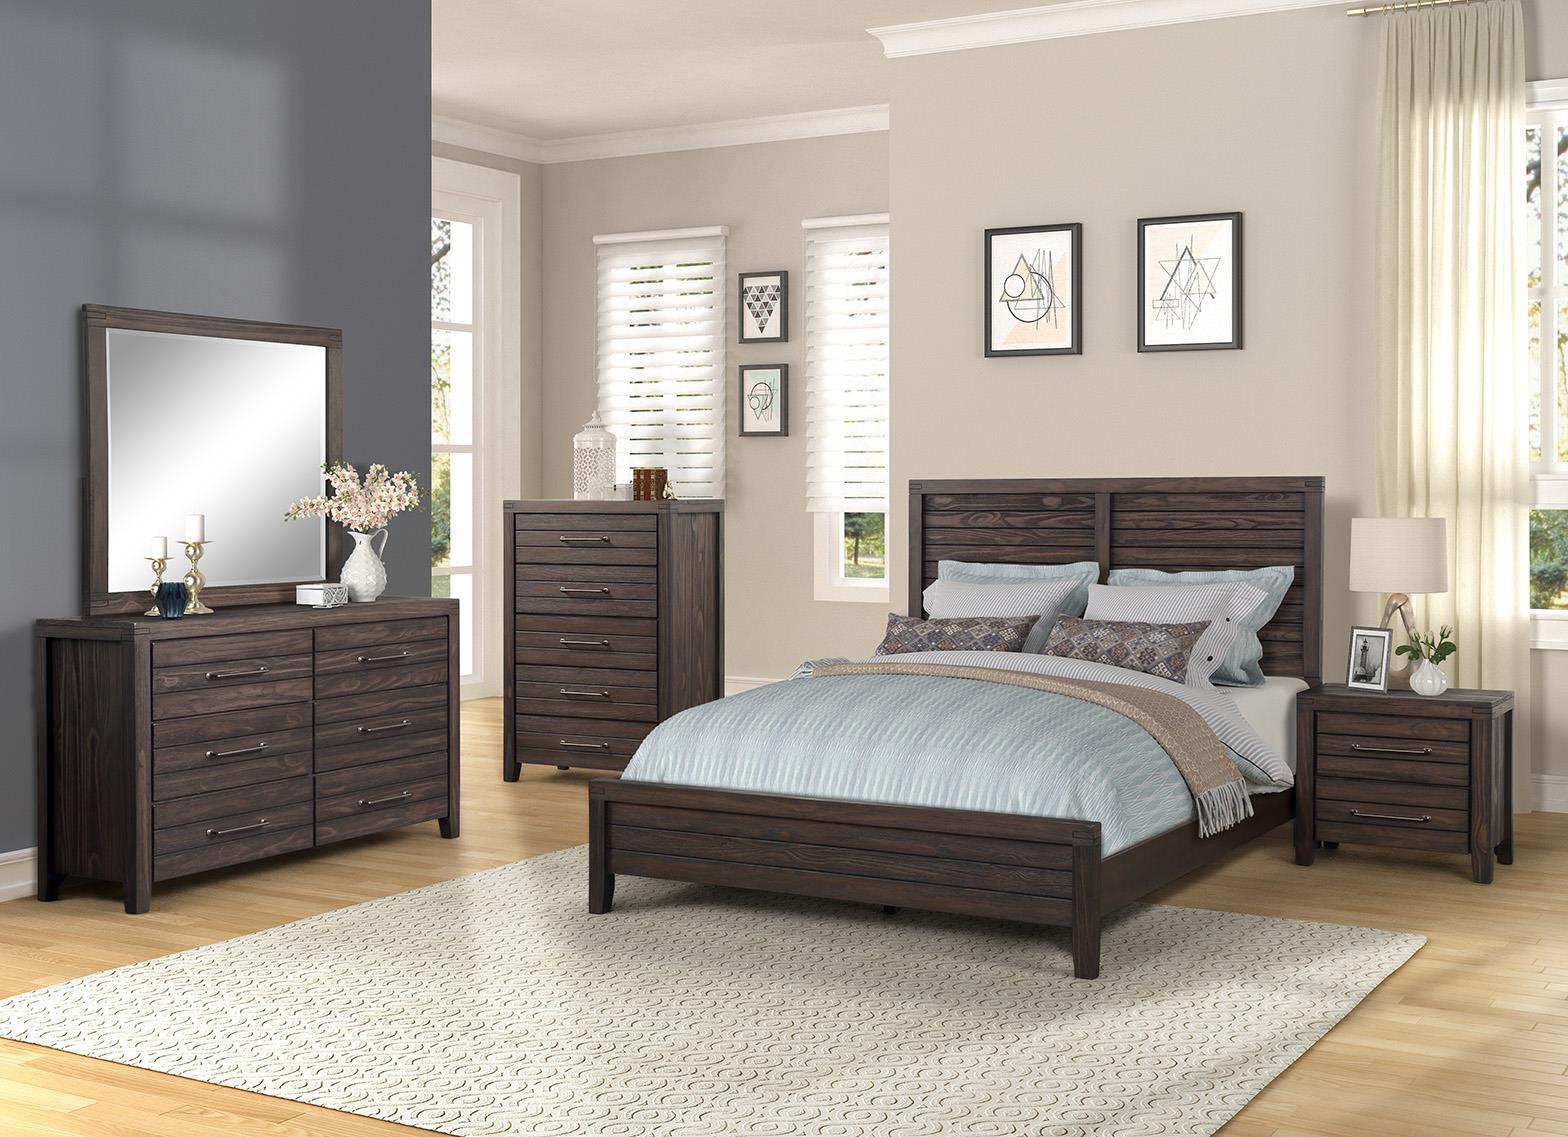 Contemporary, Traditional Panel Bedroom Set CRESTWOOD 1465-105-Set 1465-105-2NDMC-6PC in Auburn, Brown 